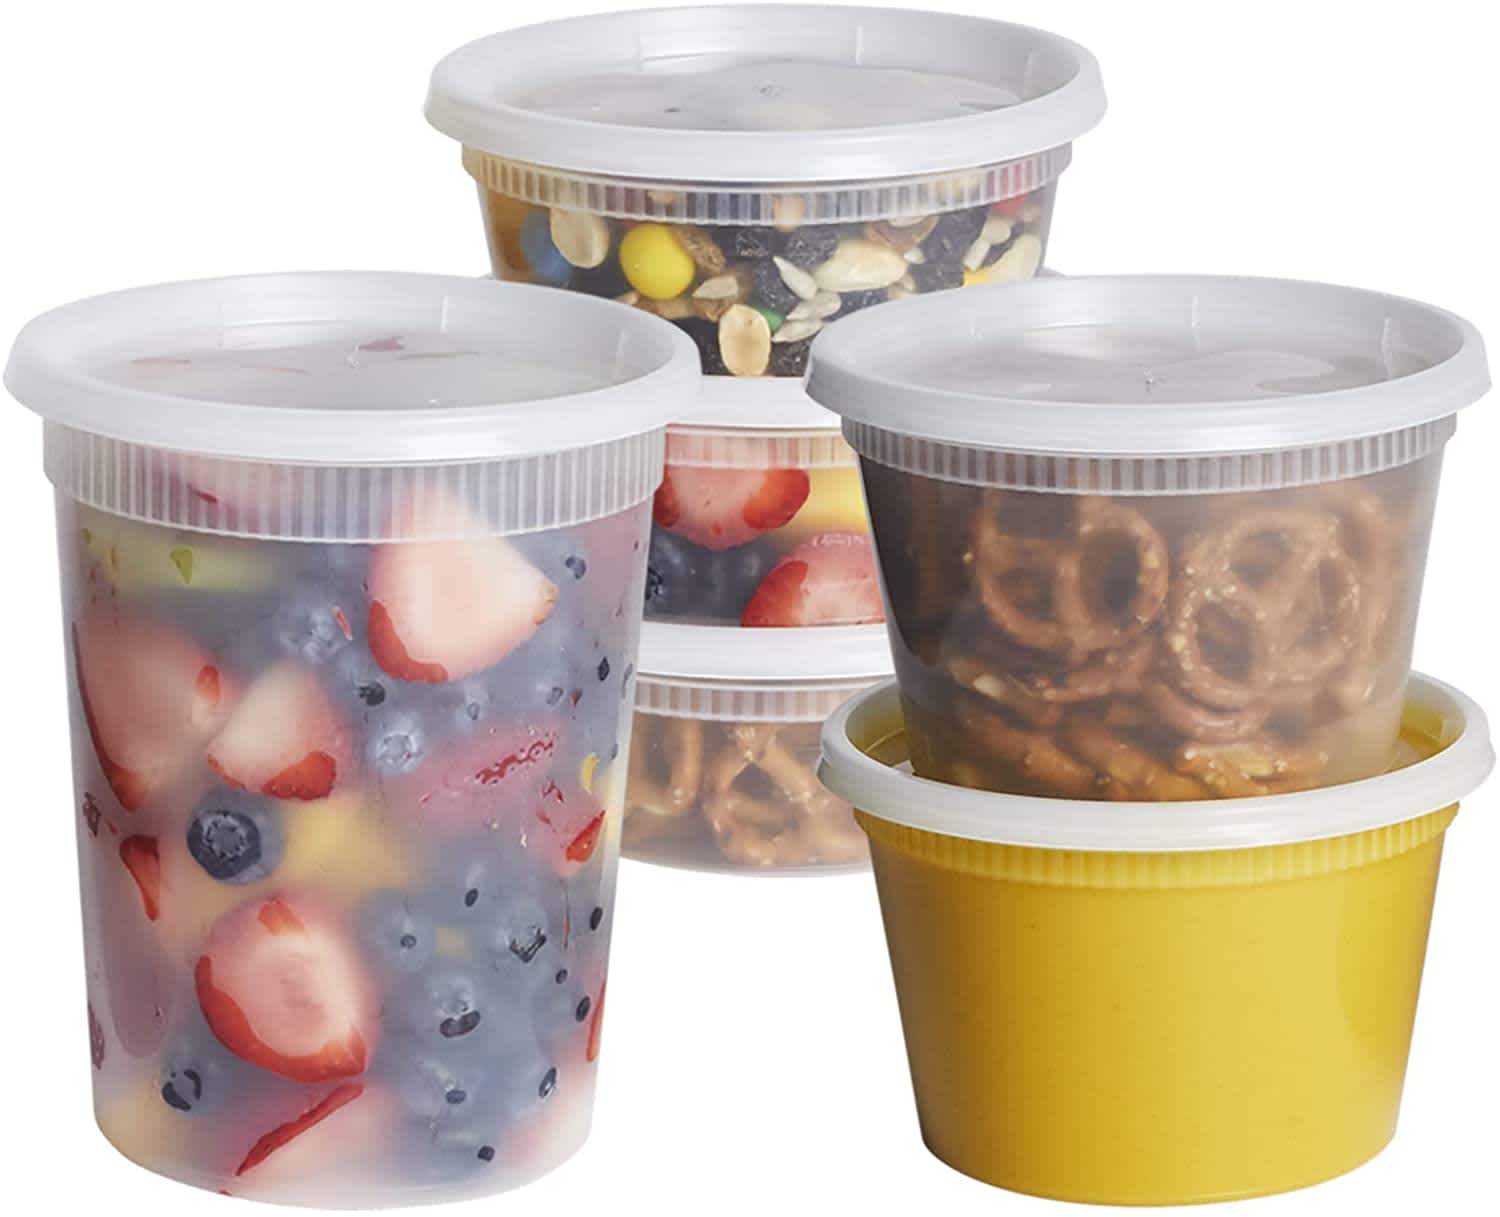 Buy SafeWare Deli Plastic Food Storage Containers with Airtight